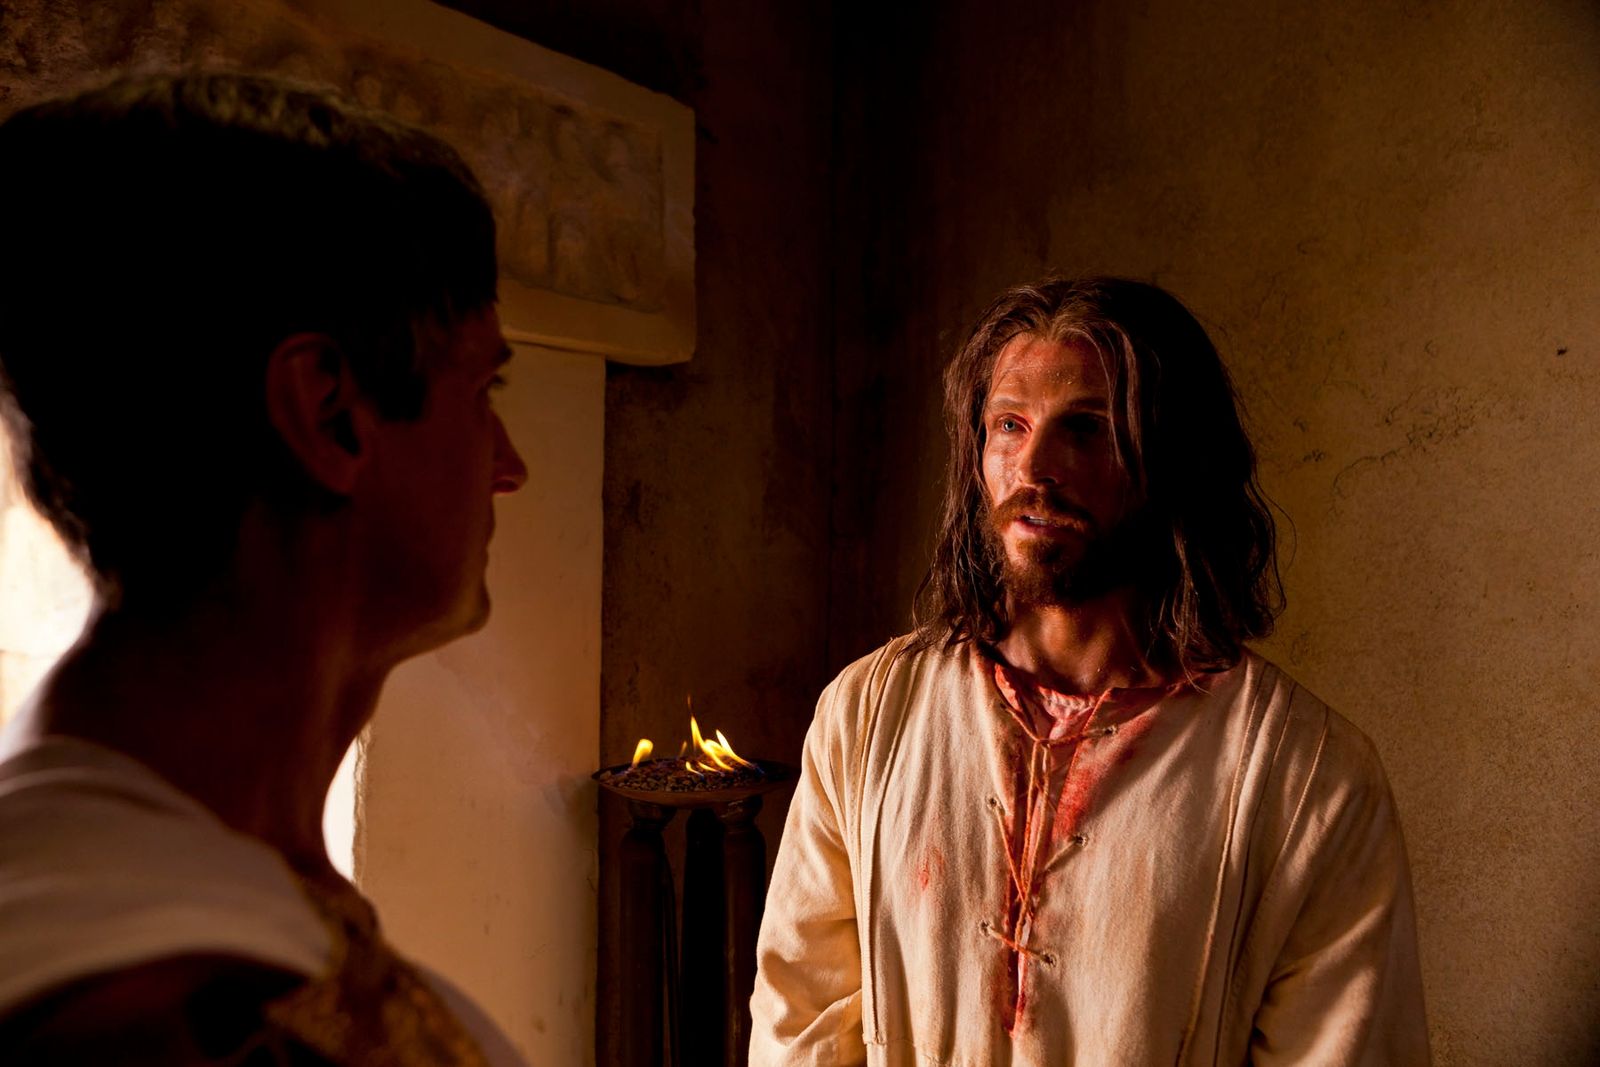 Christ meets with Pilate in private after being condemned.